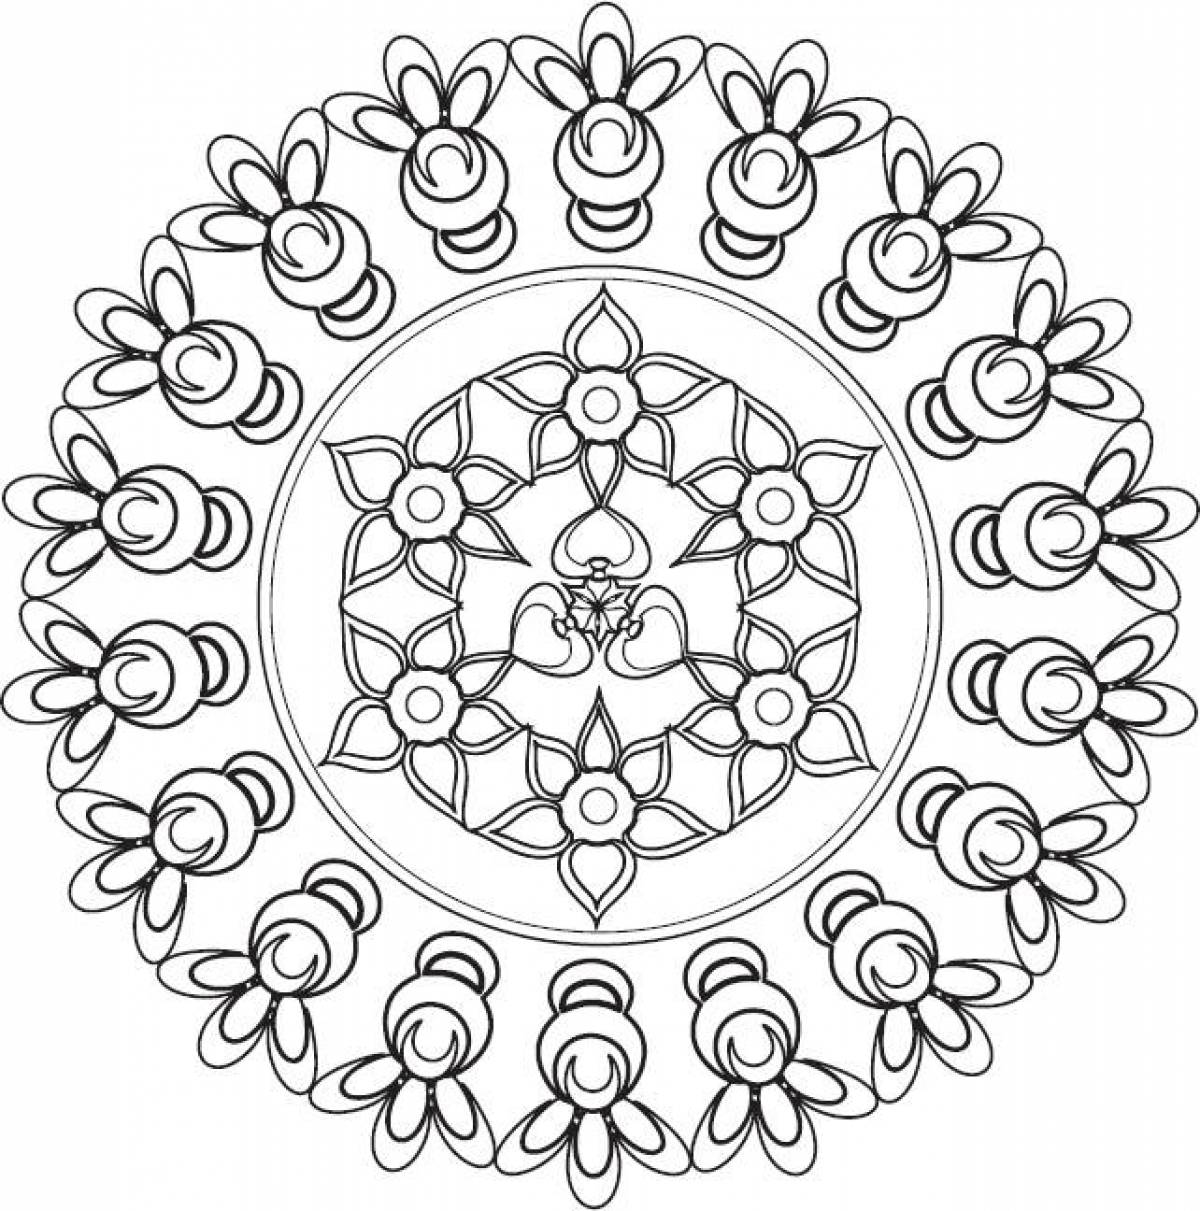 Harmonious mandala coloring pages with meaning